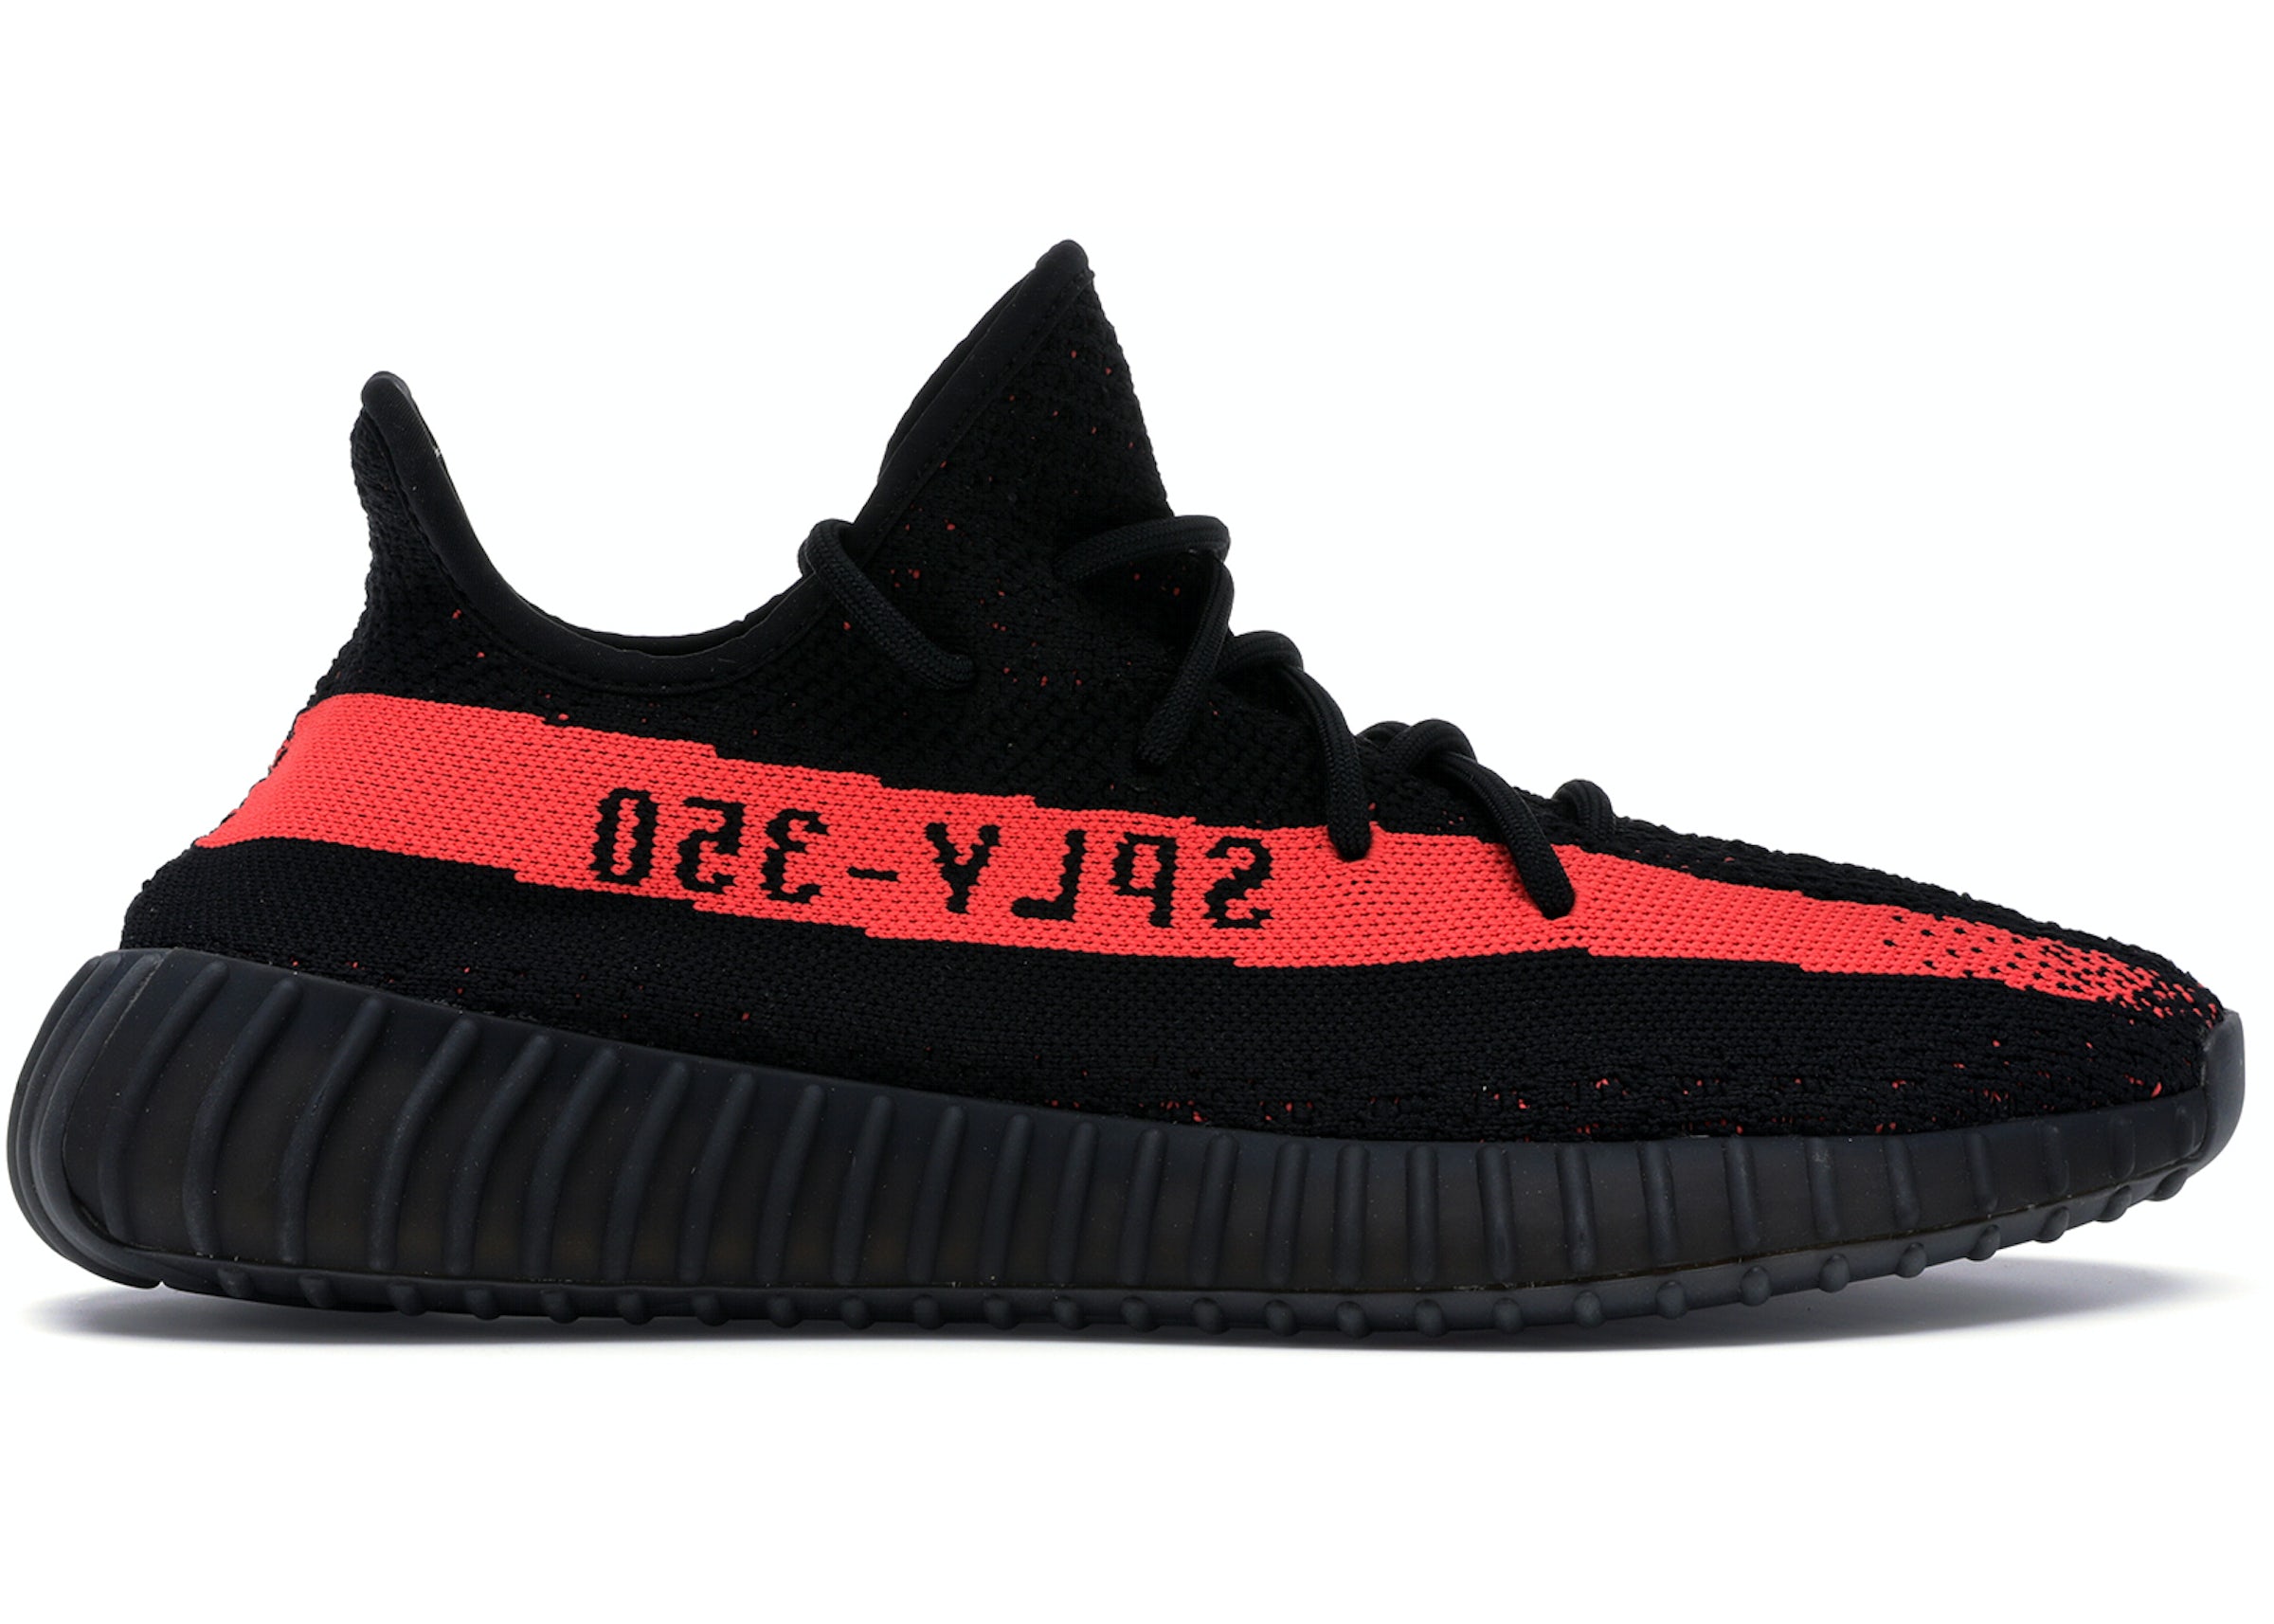 Zegevieren cafe reservering adidas Yeezy Boost 350 V2 Core Black Red (2016/2022/2023) Men's - BY9612 -  US